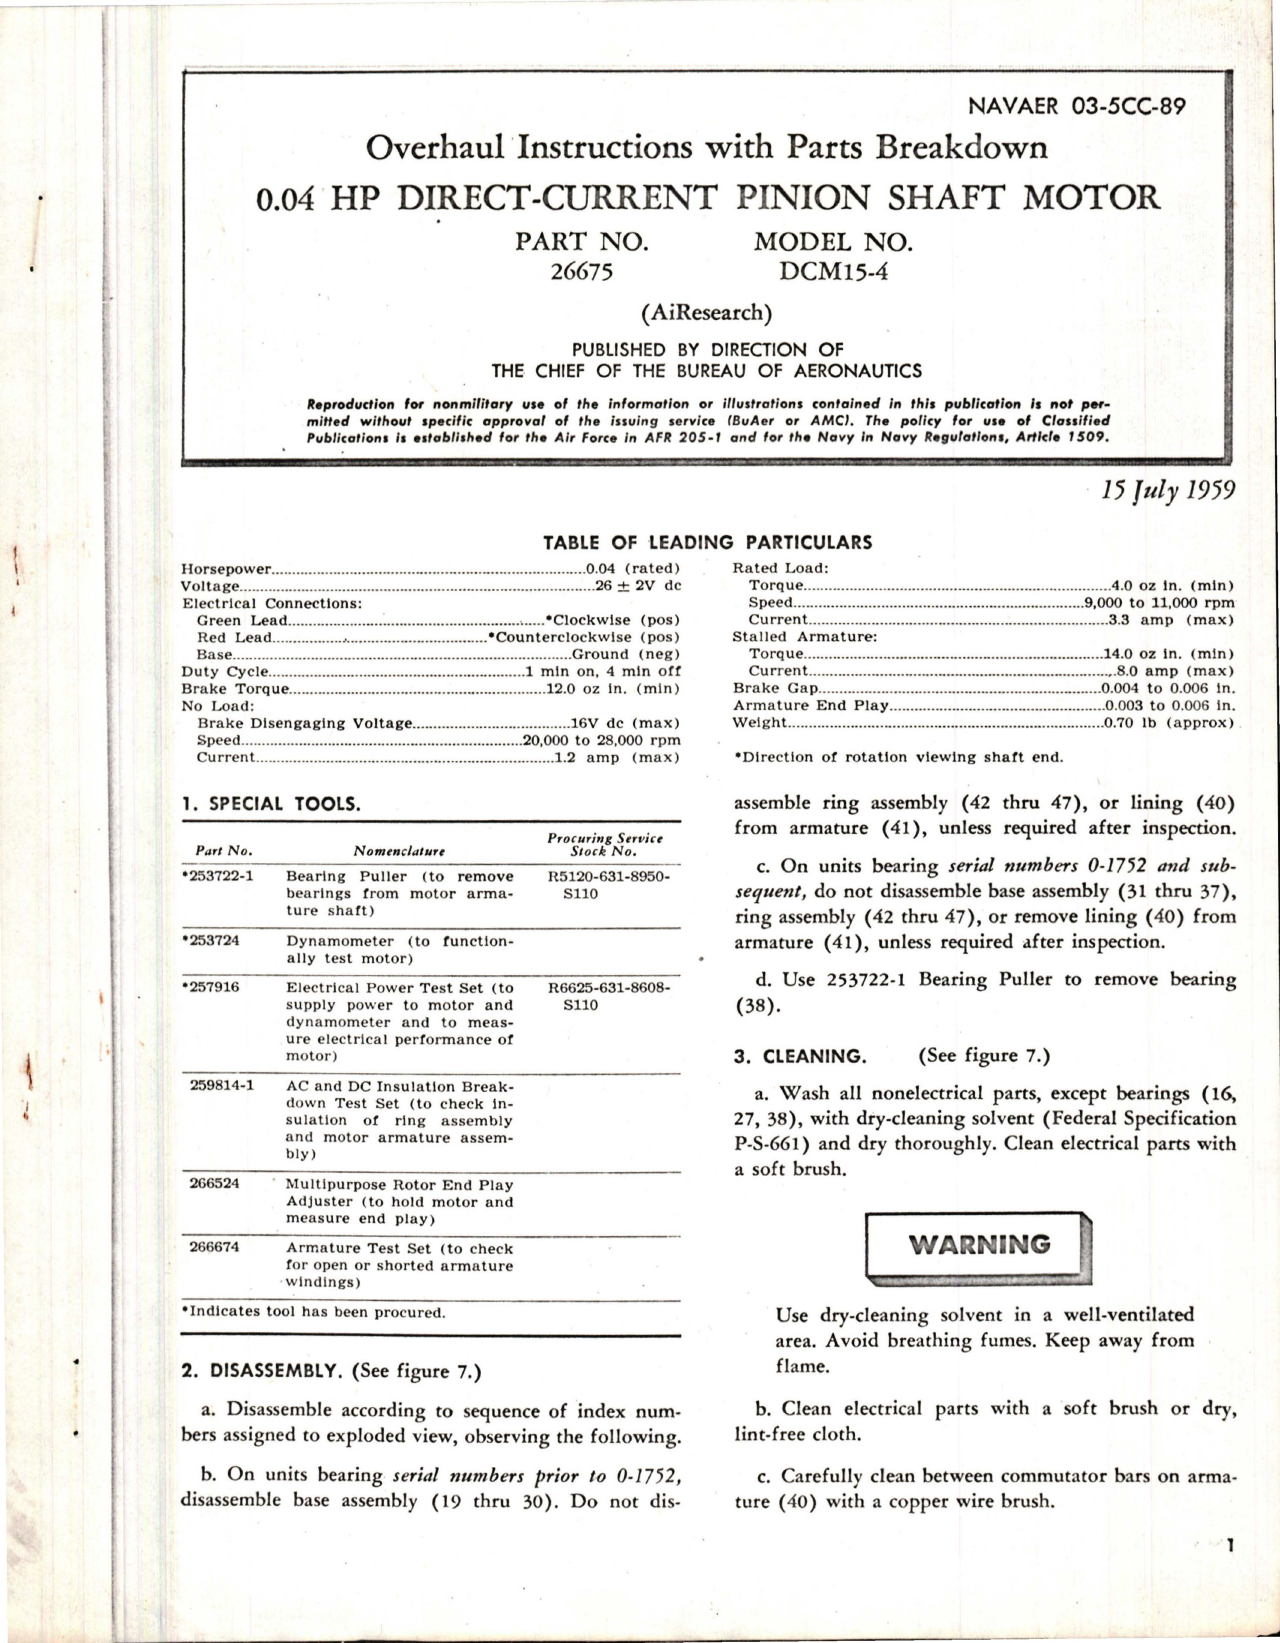 Sample page 1 from AirCorps Library document: Overhaul Instructions with Parts Breakdown for HP Direct Current Pinion Shaft Motor 0.04 - Part 26675 - Model DCM15-4